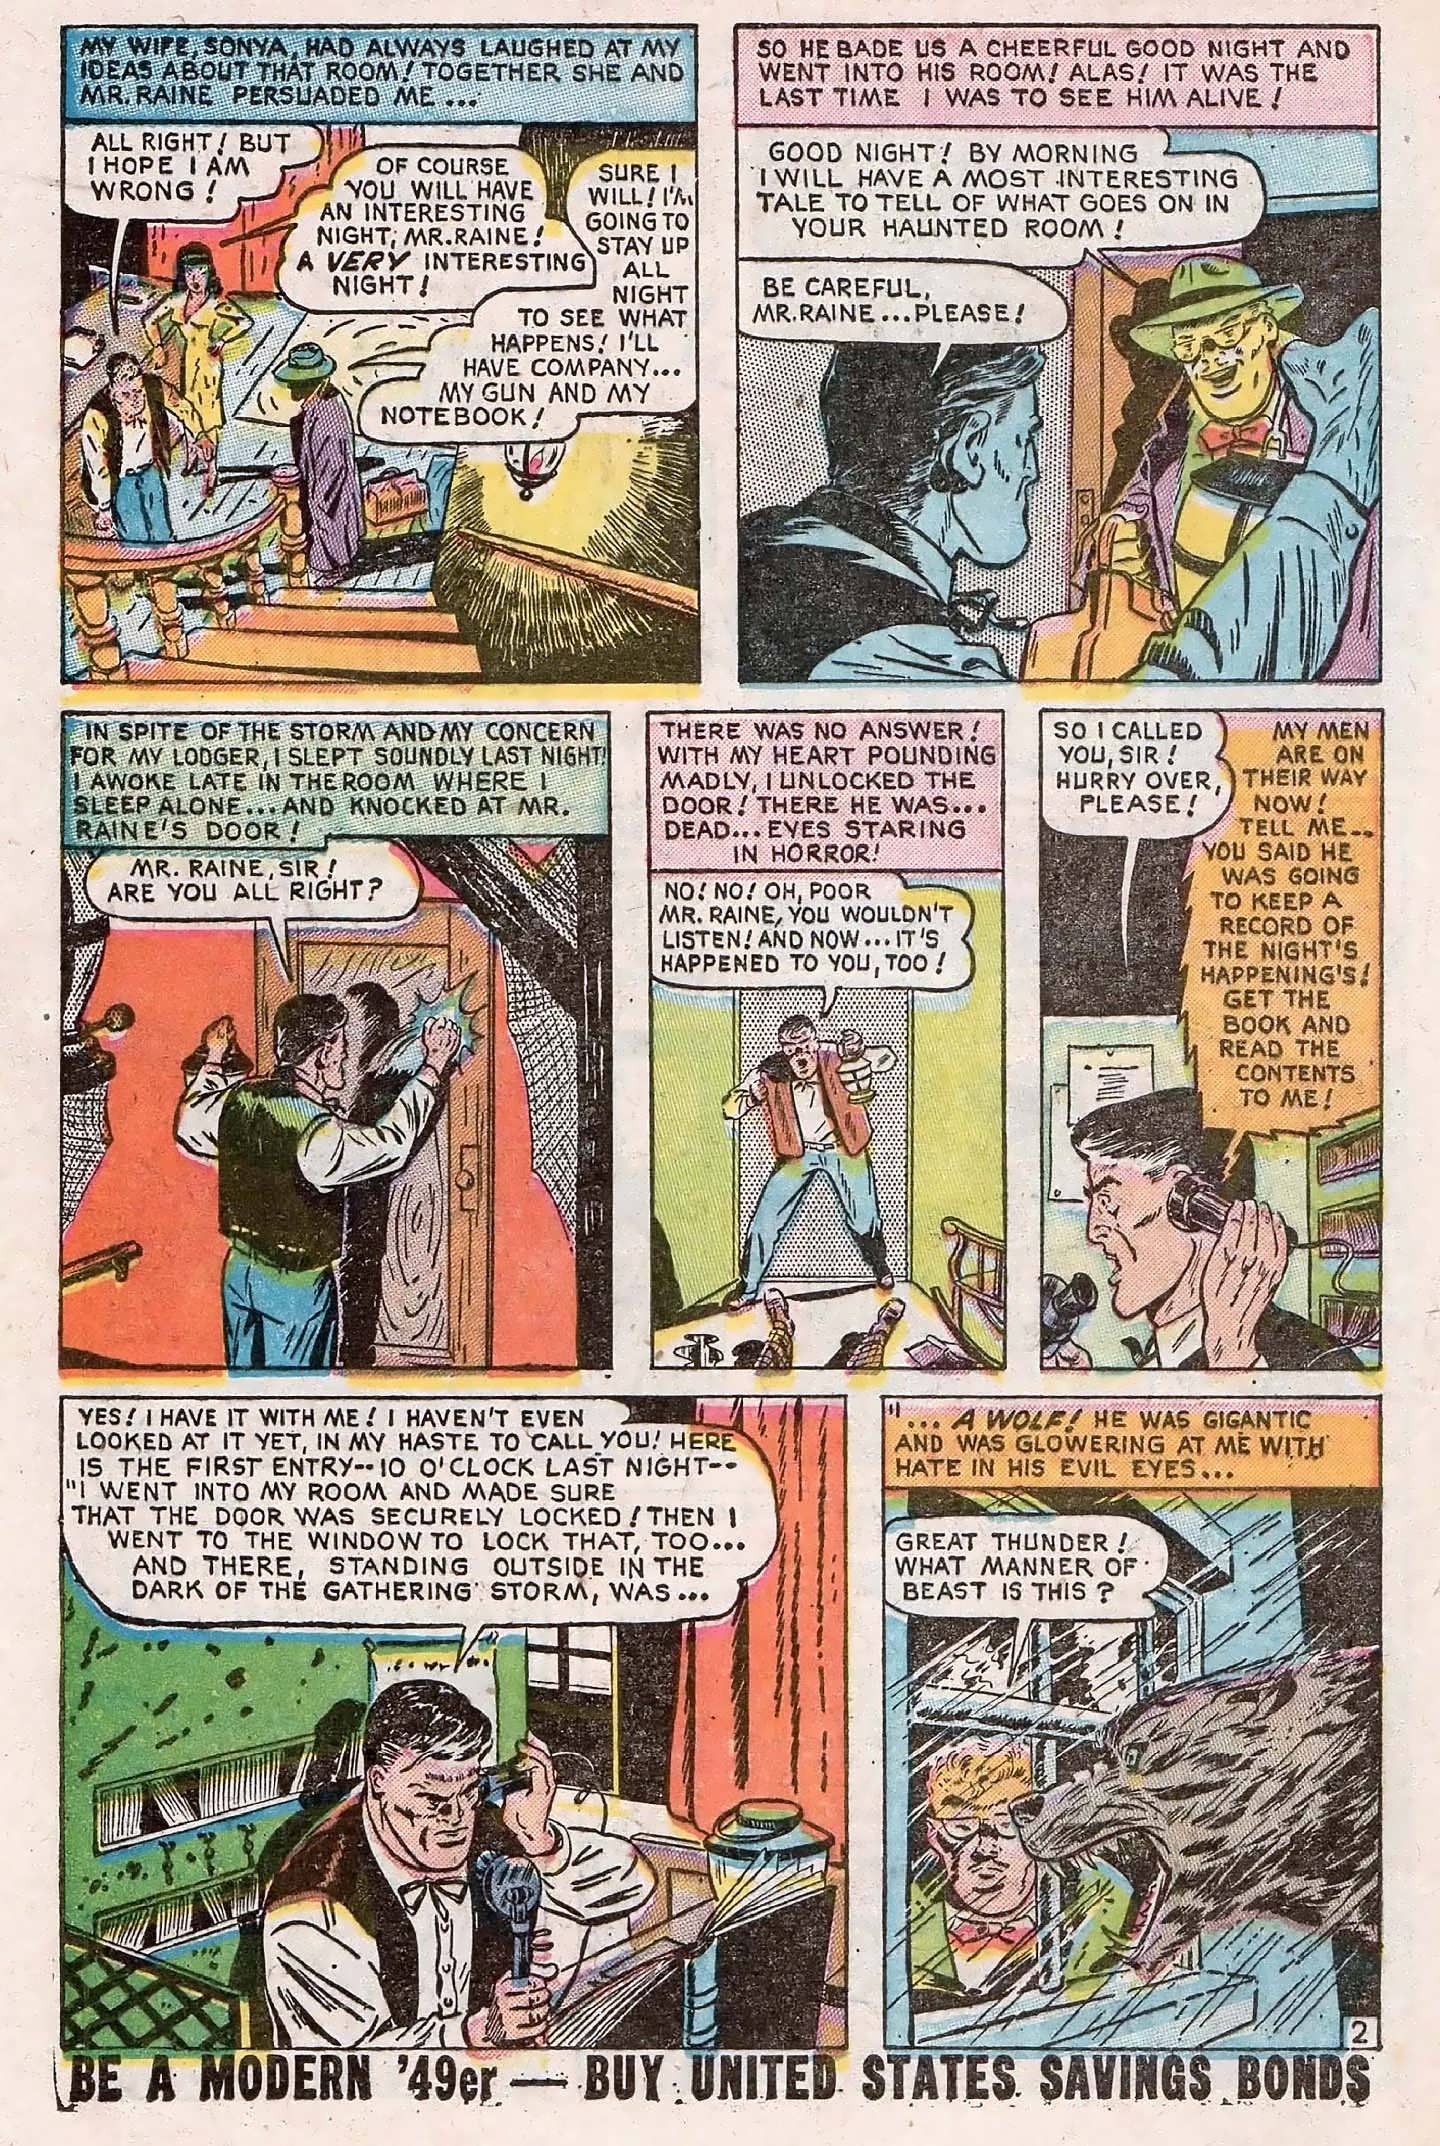 Marvel Tales (1949) 93 Page 3